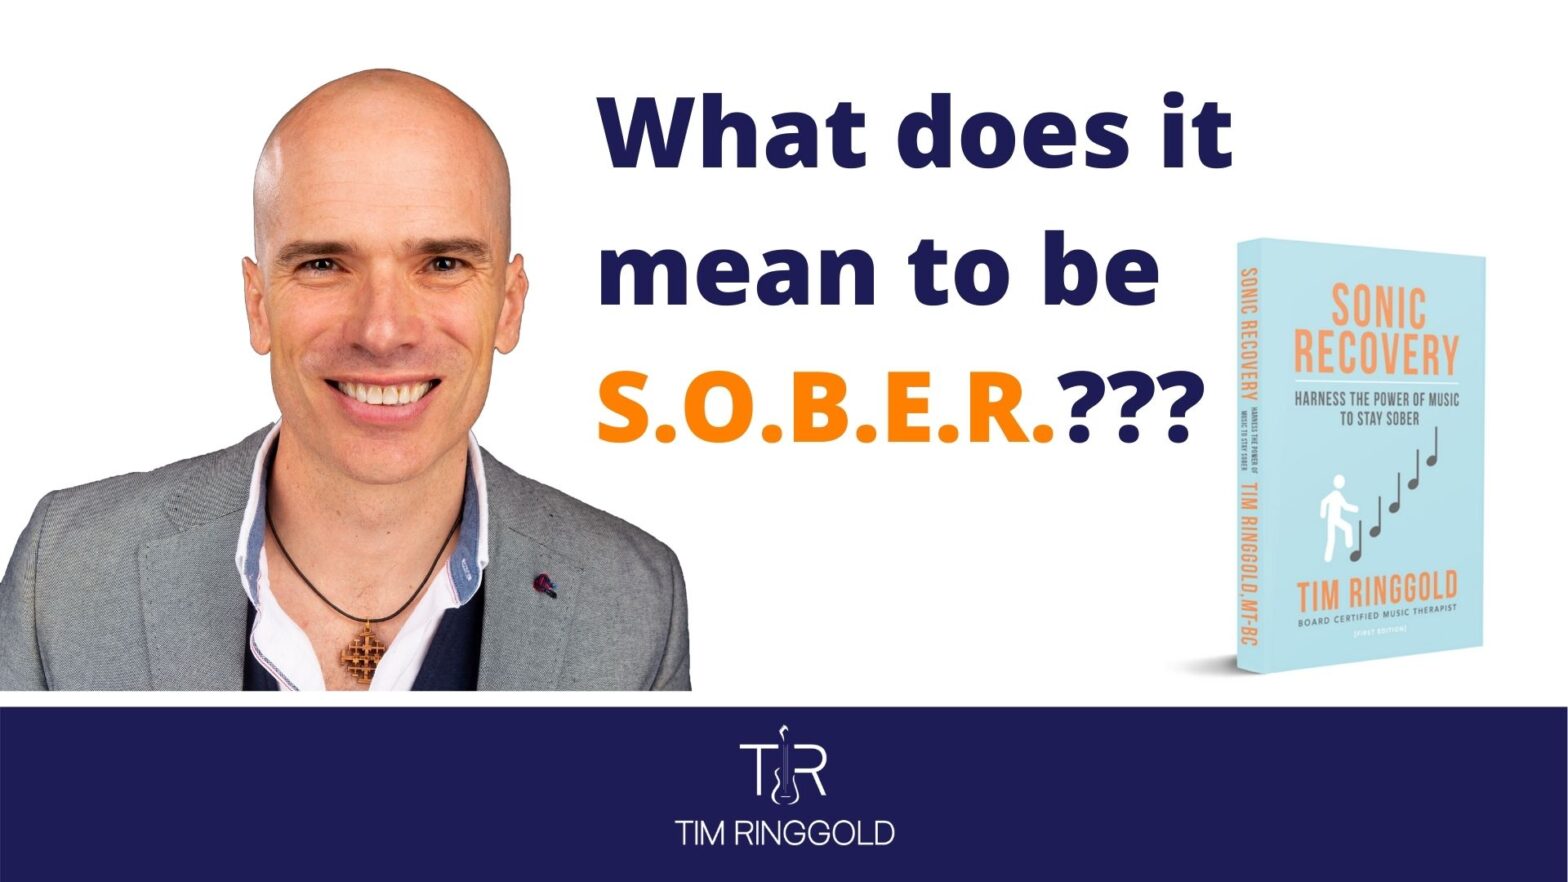 What does it mean to be S.O.B.E.R.?